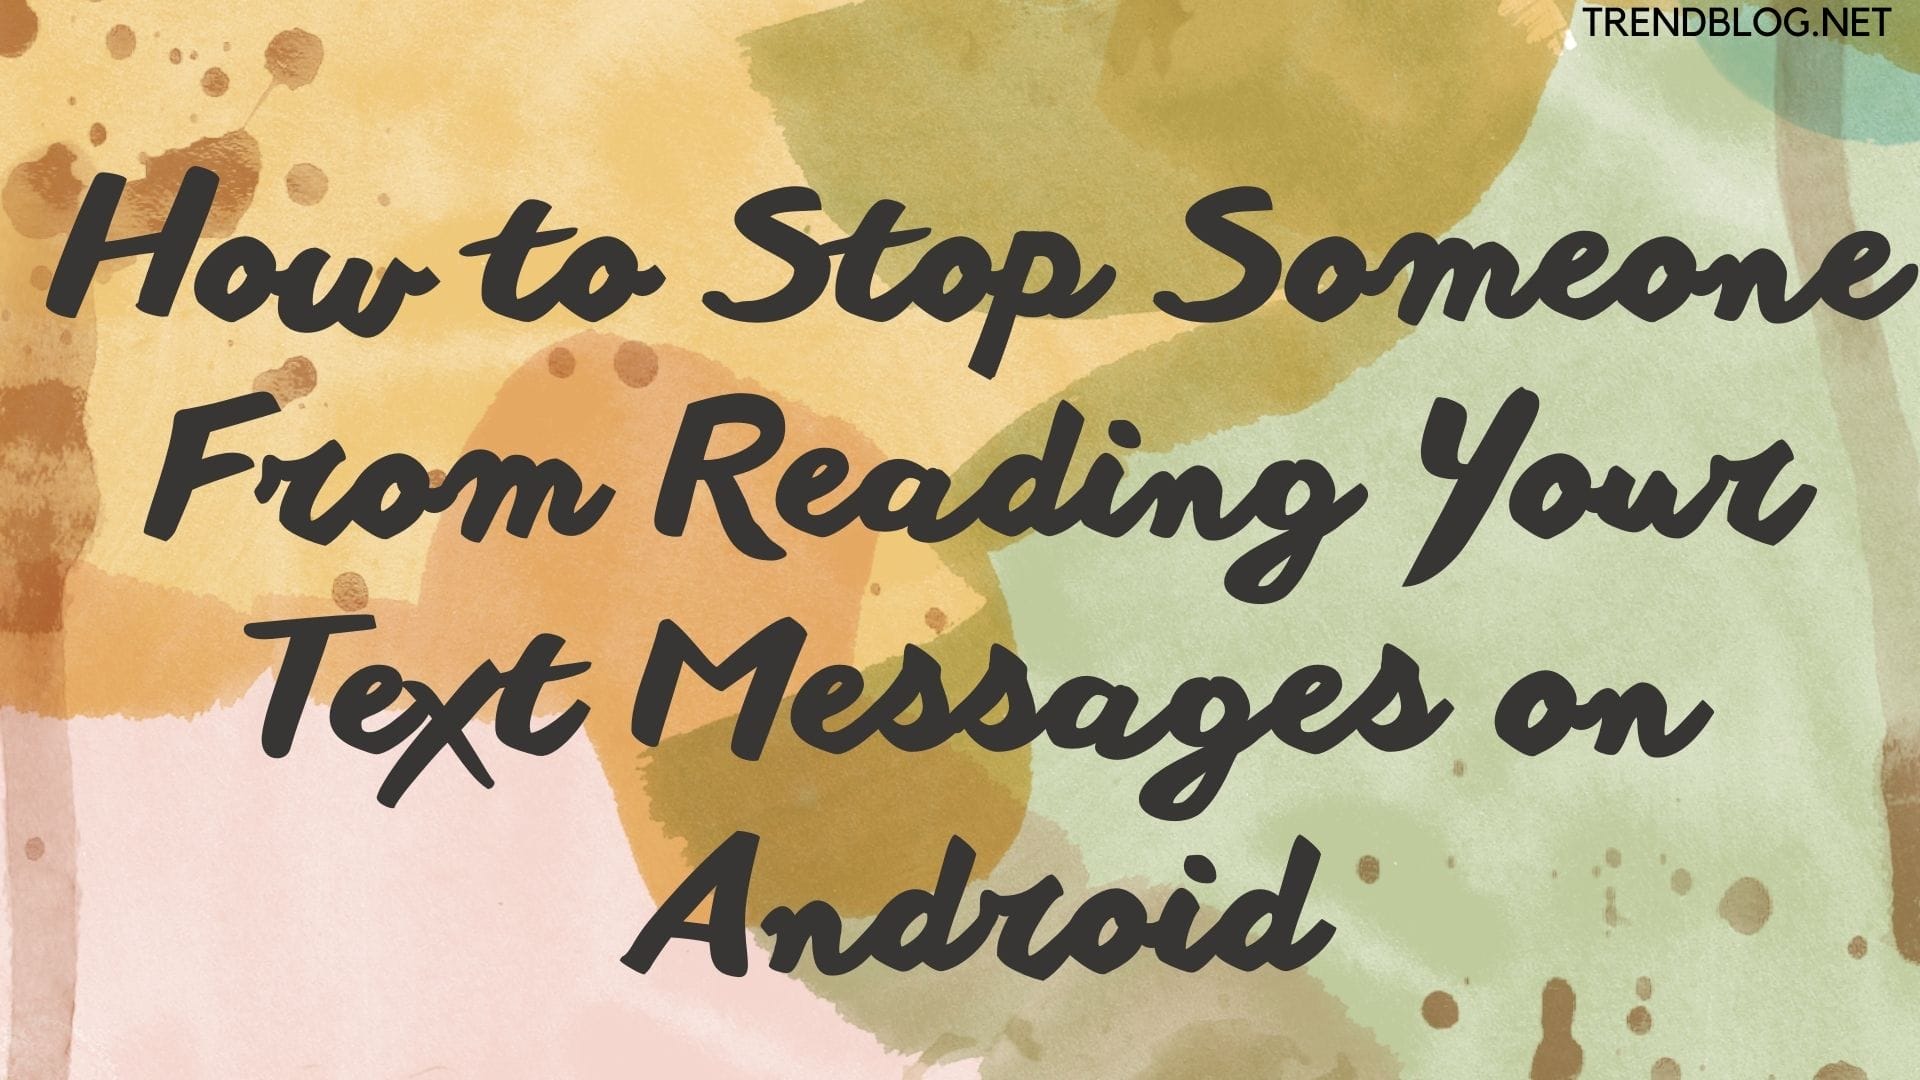 How to Stop Someone From Reading Your Text Messages on Android